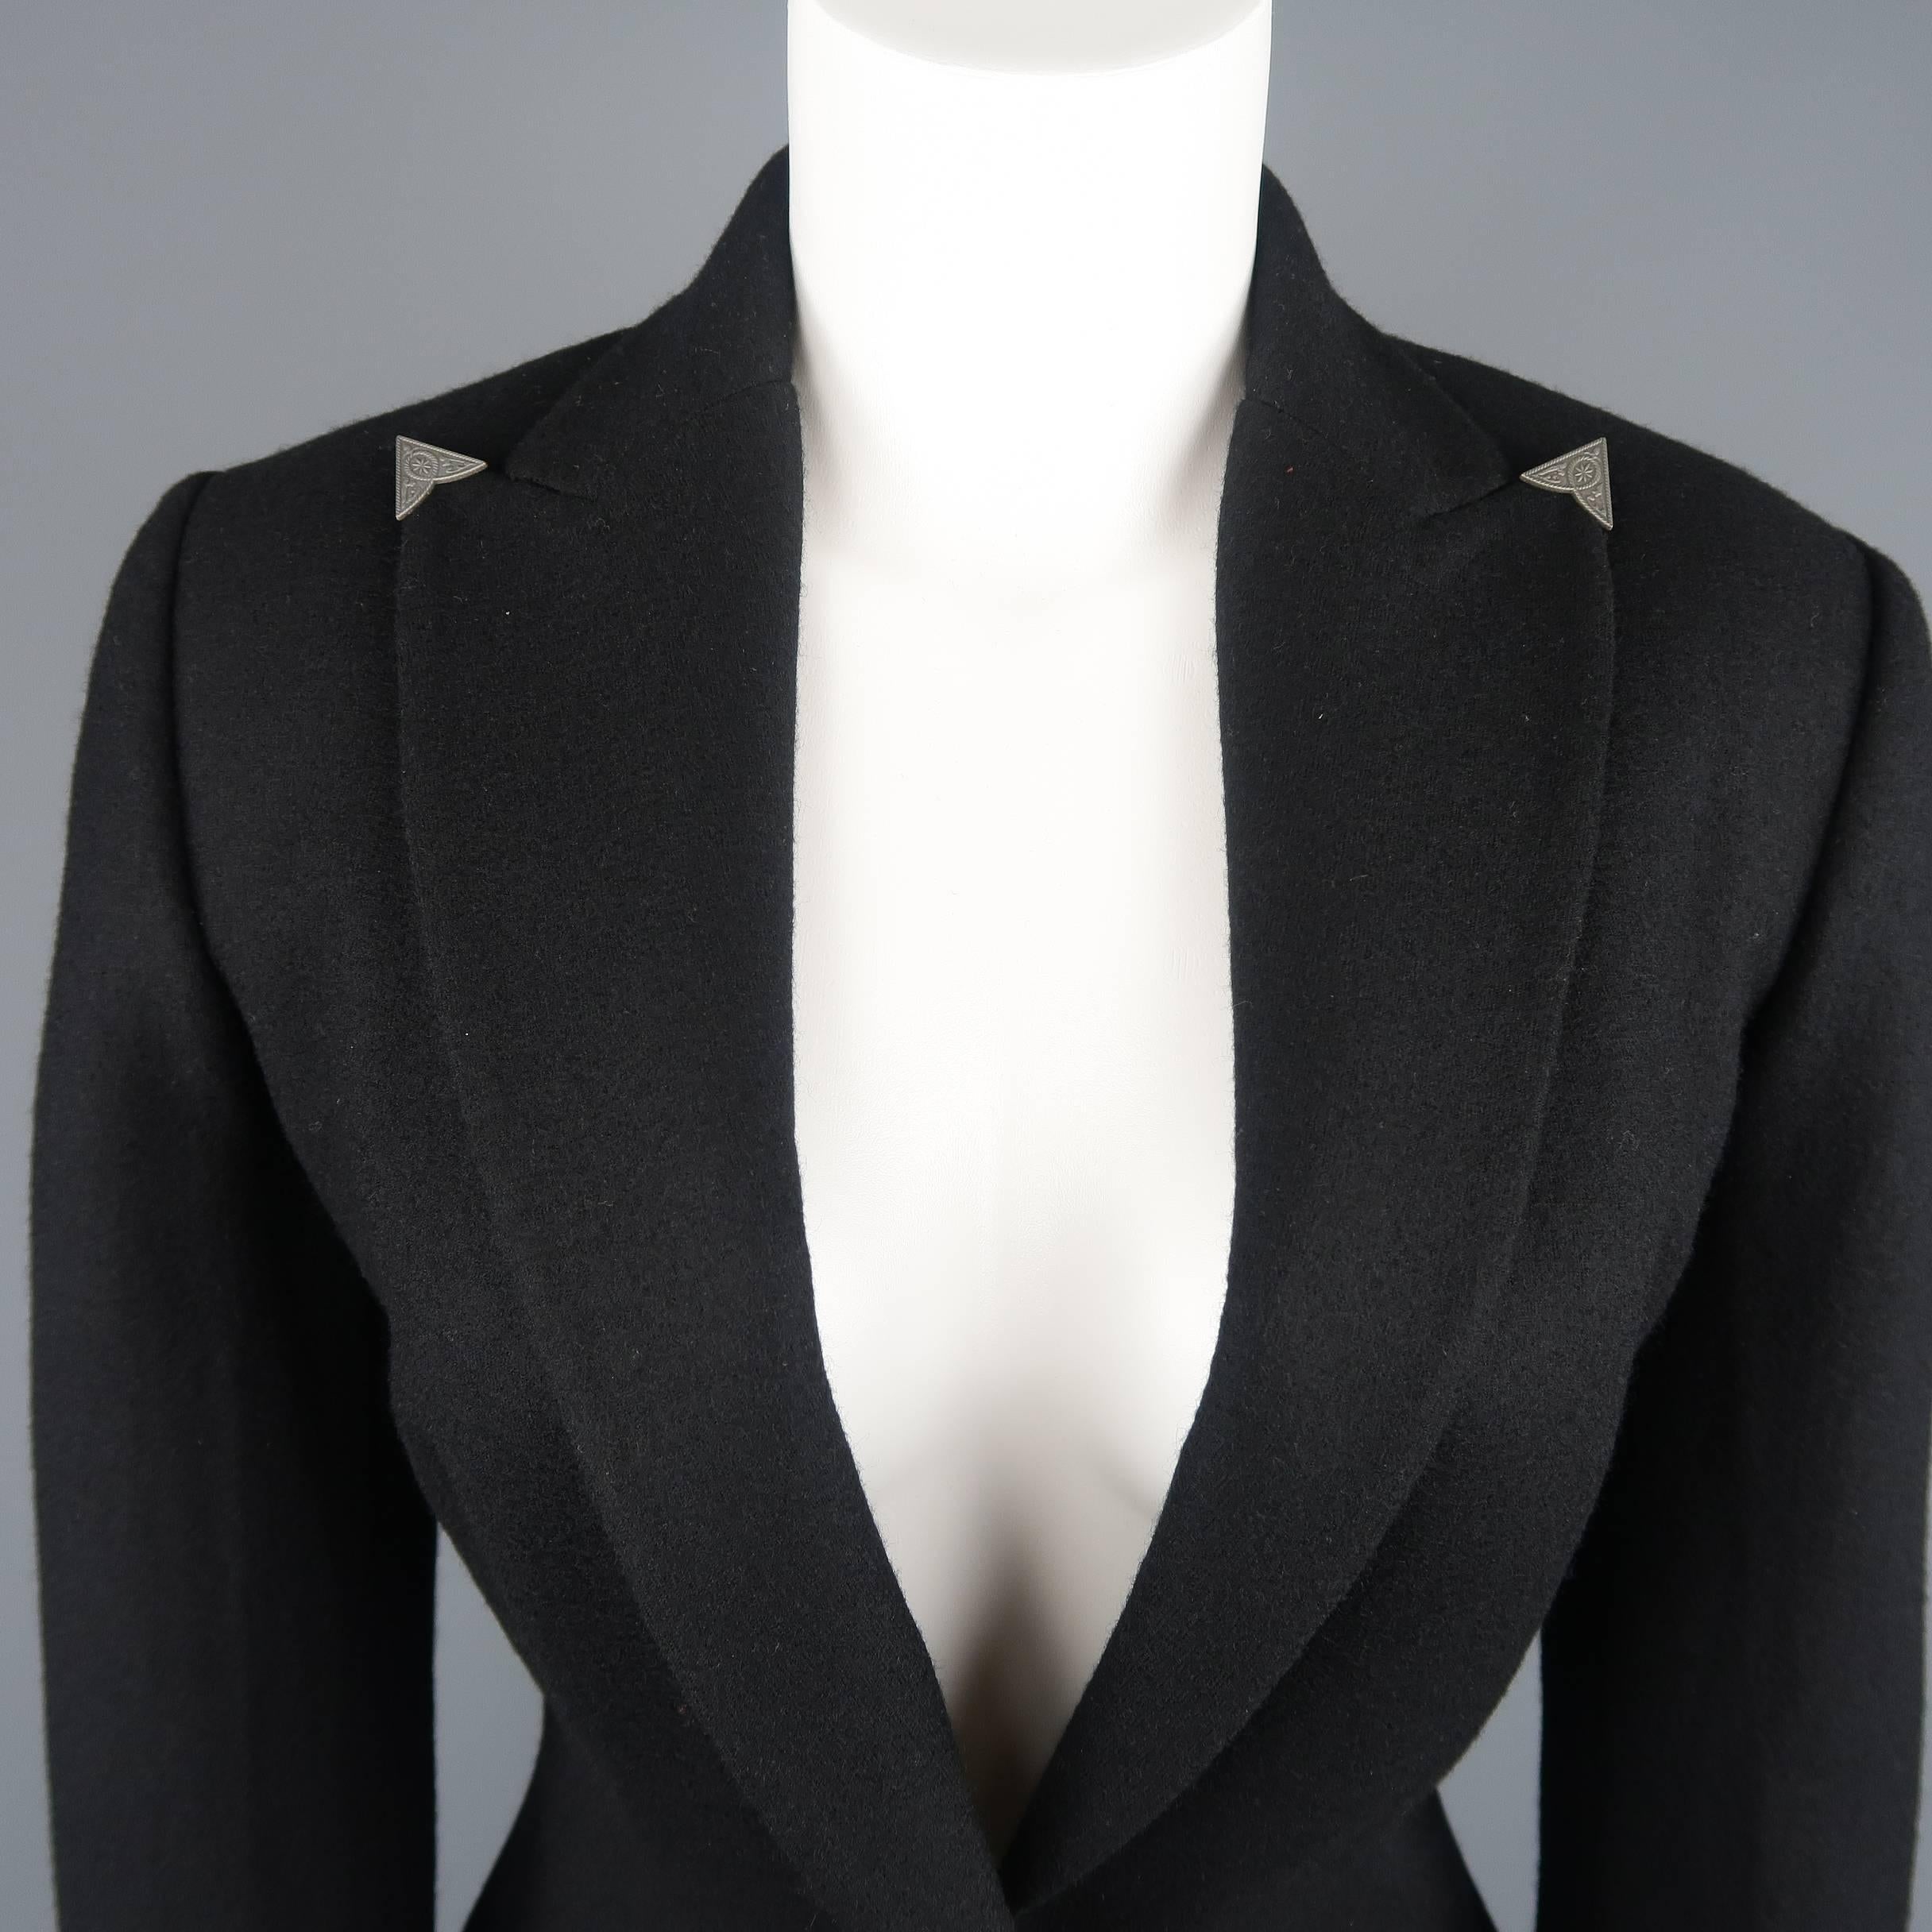 RALPH LAUREN Blue Label jacket comes in black wool with a single button front, tailored silhouette, long, pointed back hem, and peak lapel with silver tone western collar clip detail.
 
Excellent Pre-Owned Condition.
Marked: 8
 
Measurements:
